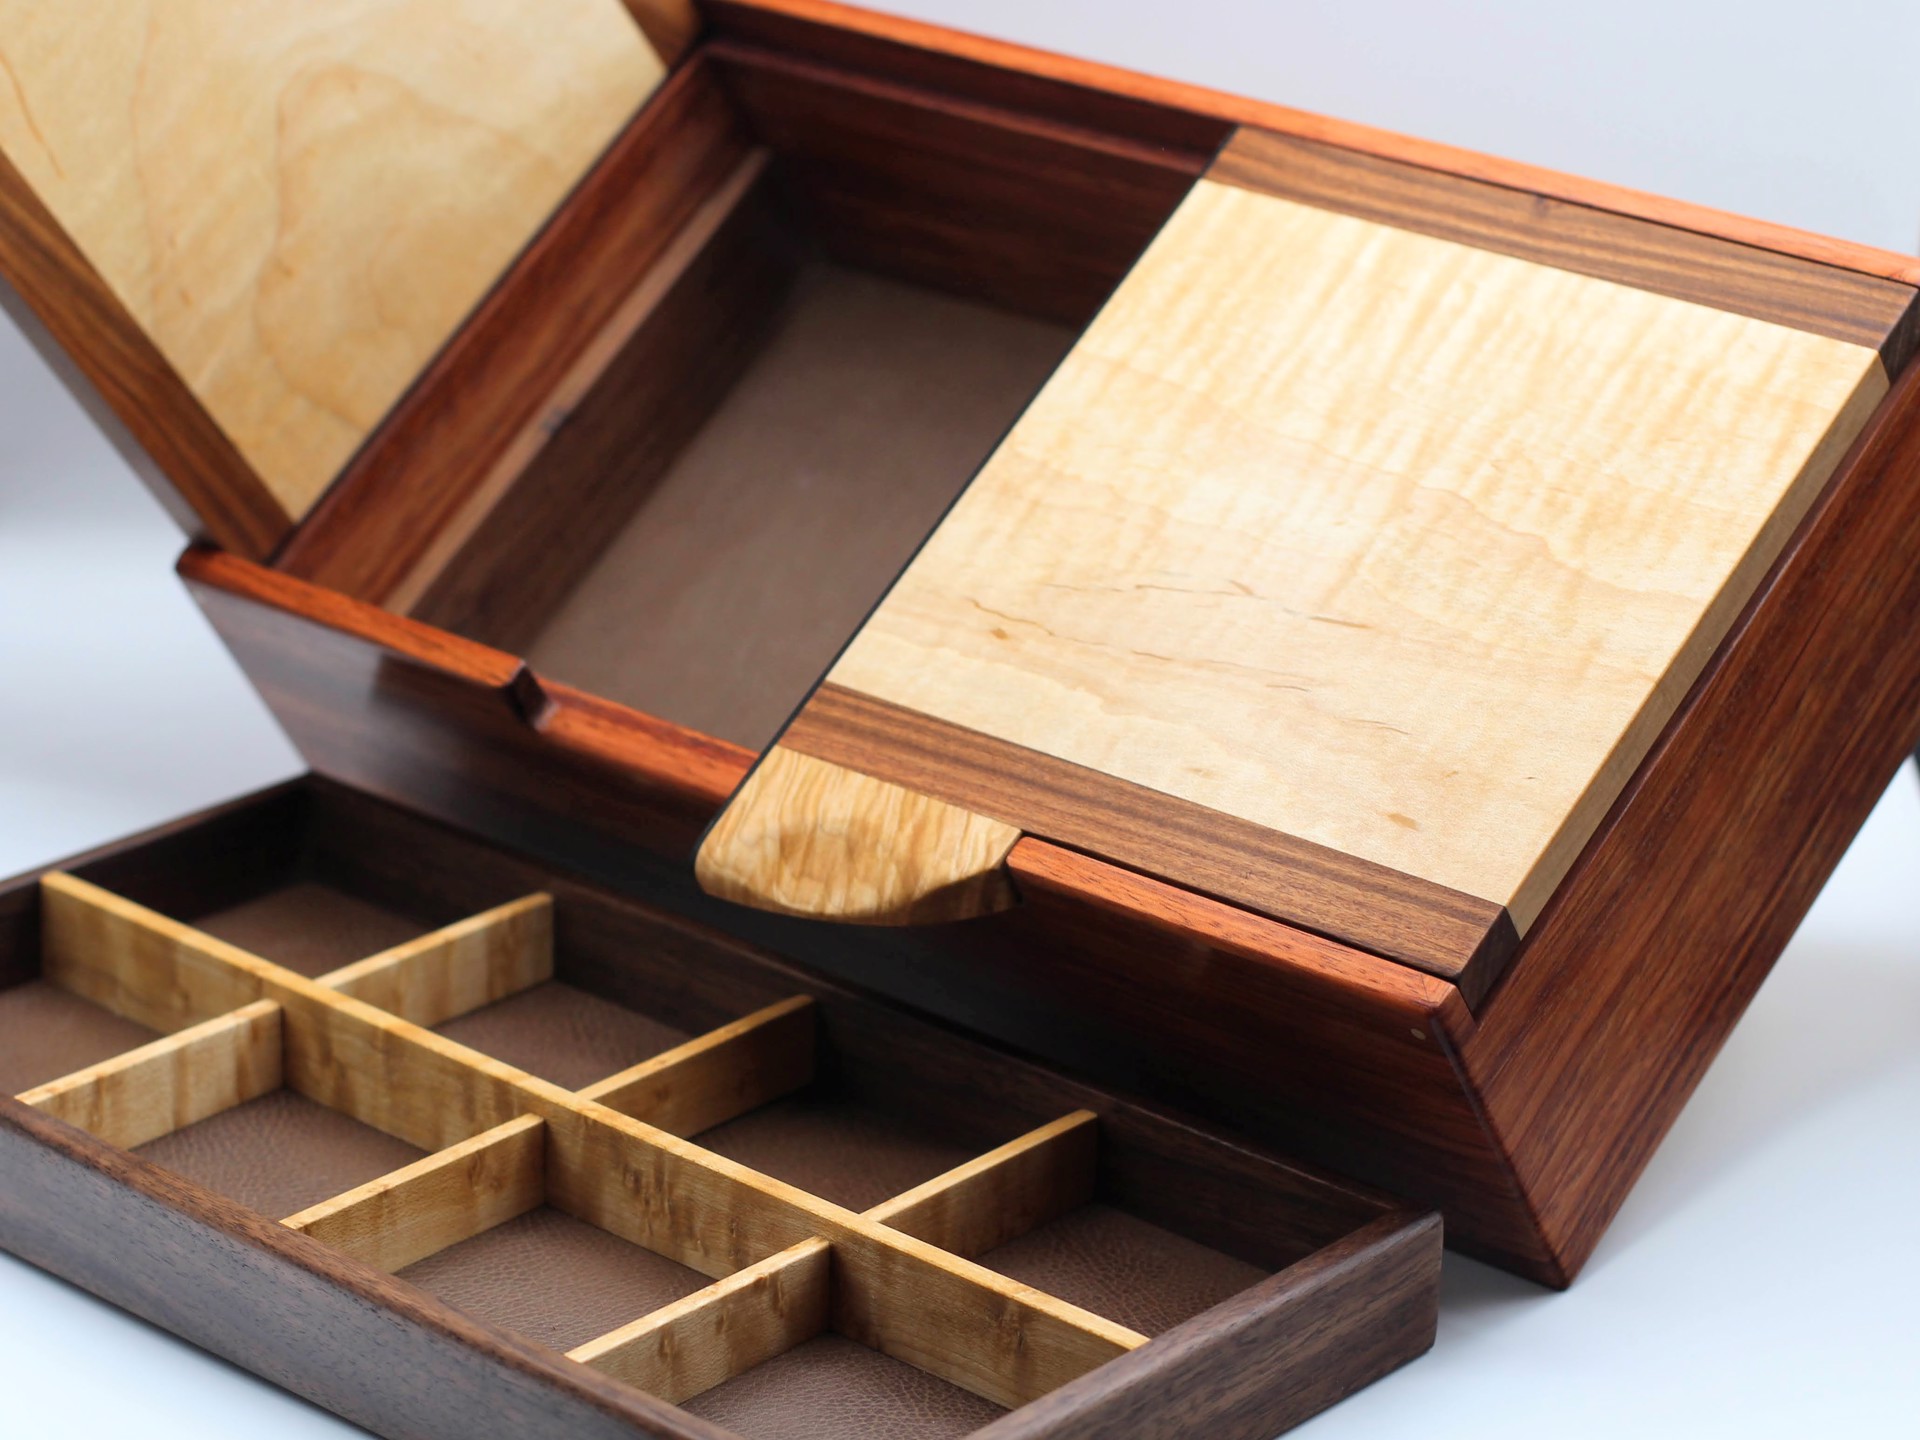 Wing Lid with Tray Jewelry Box by Doug Thoeny